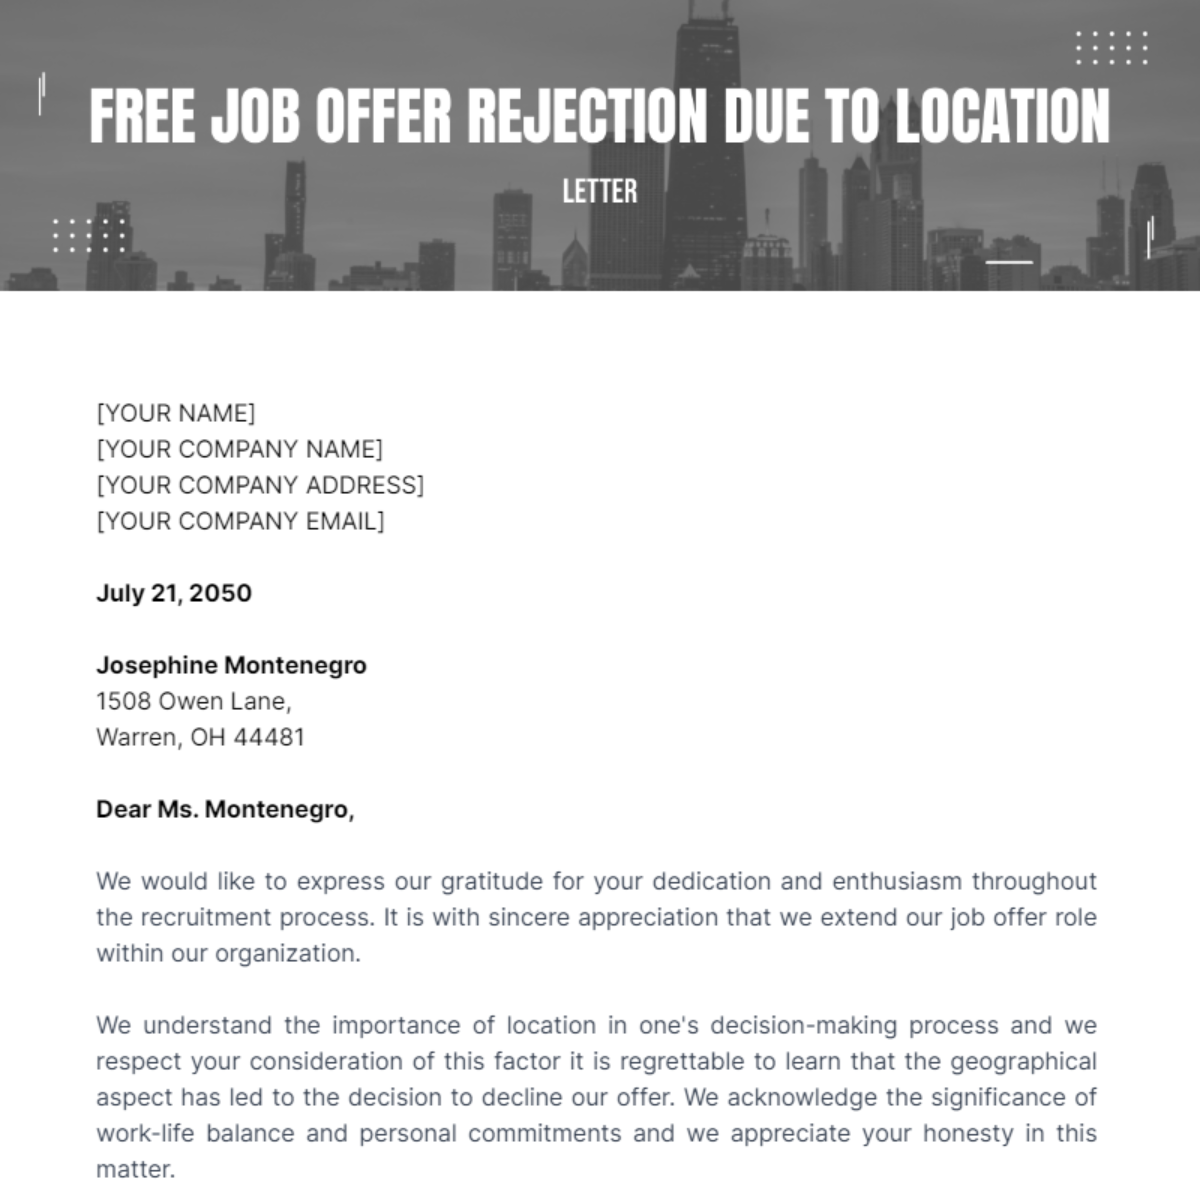 Job Offer Rejection Letter Due to Location Template